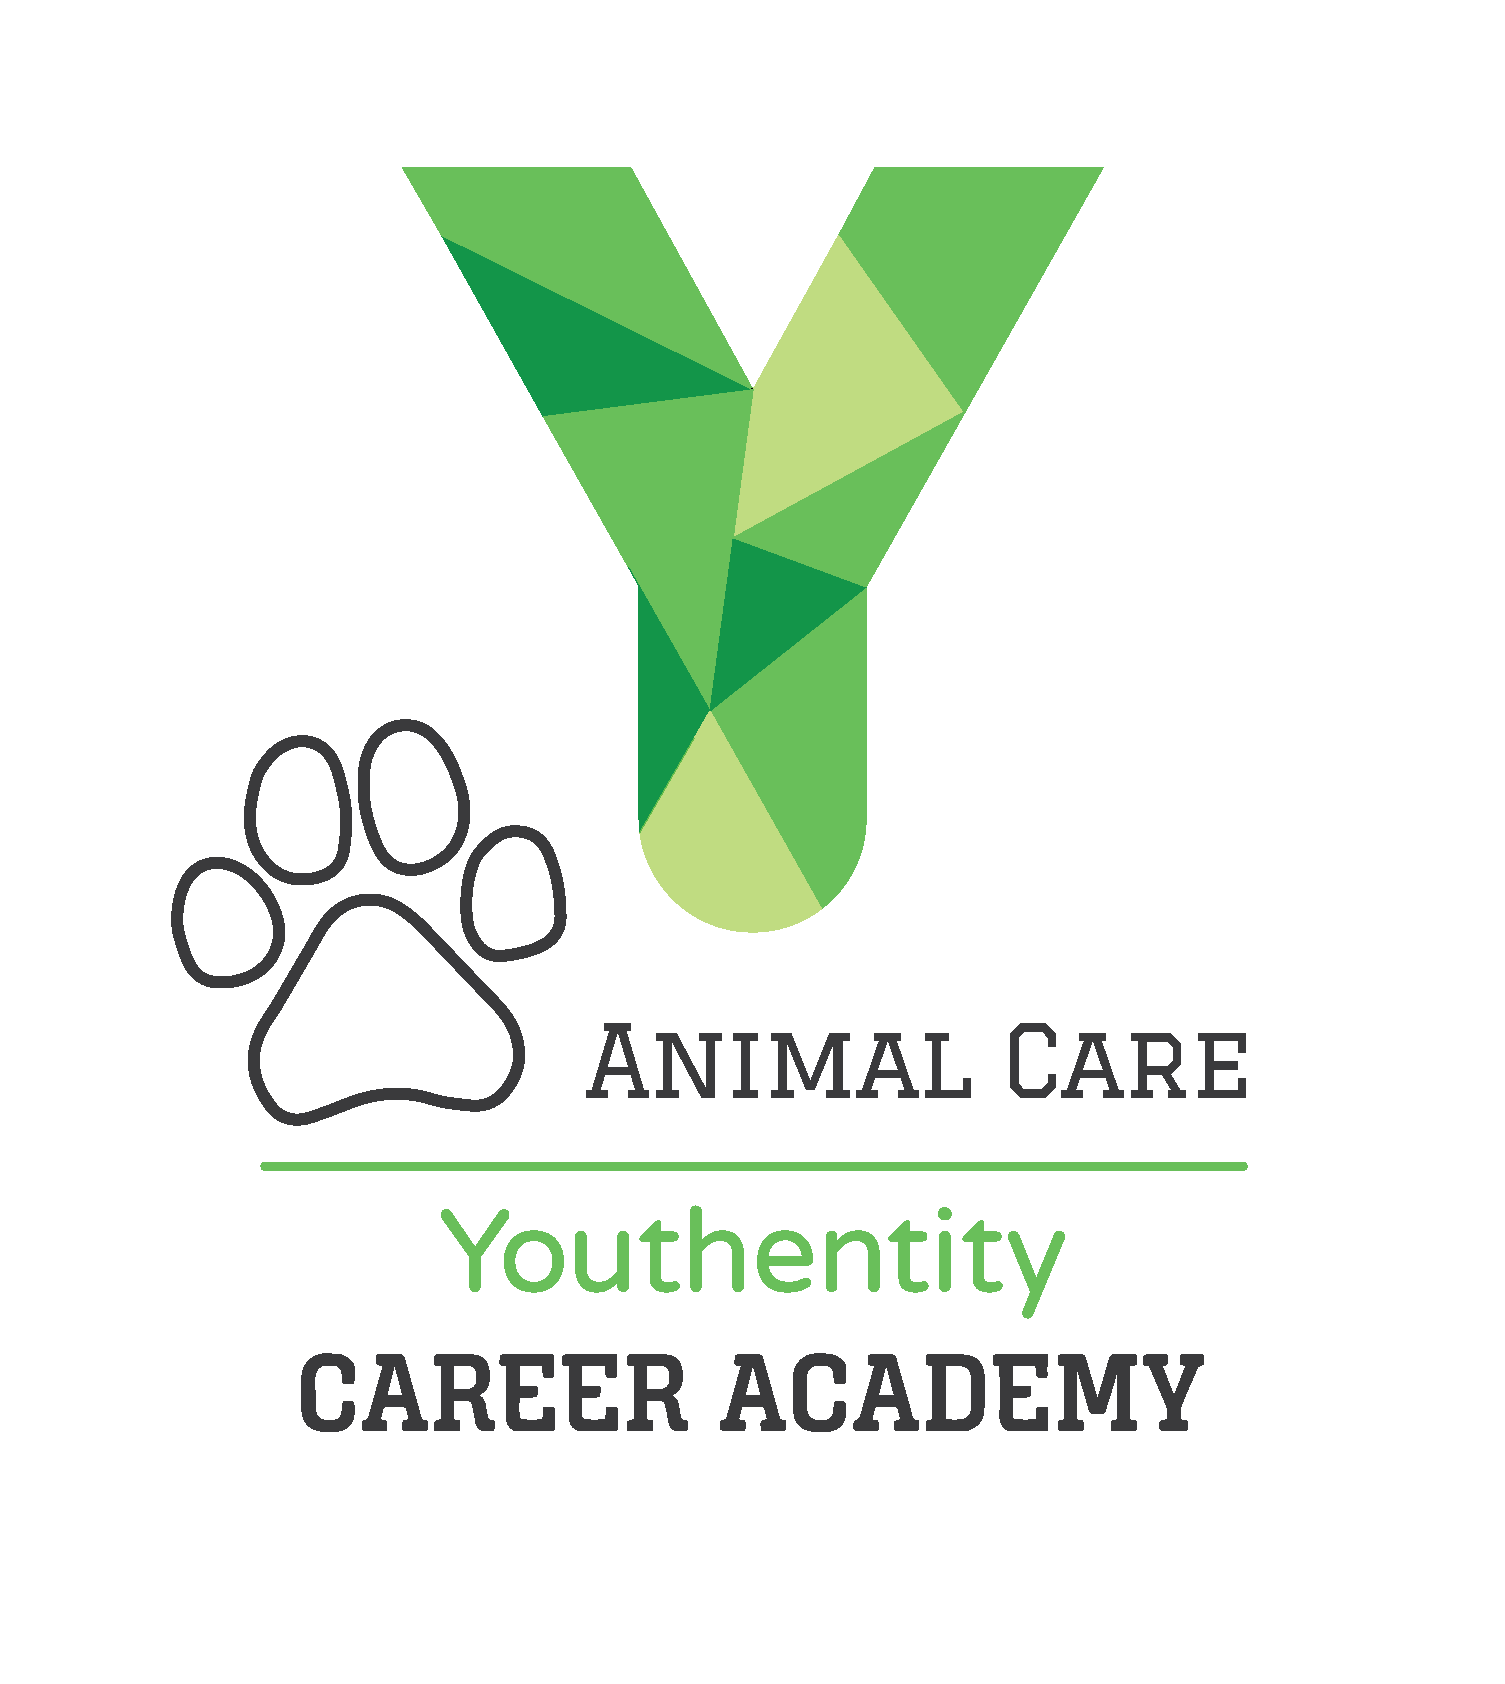 Career Academy Vertical logo COLOR - AnimalCare-01.png